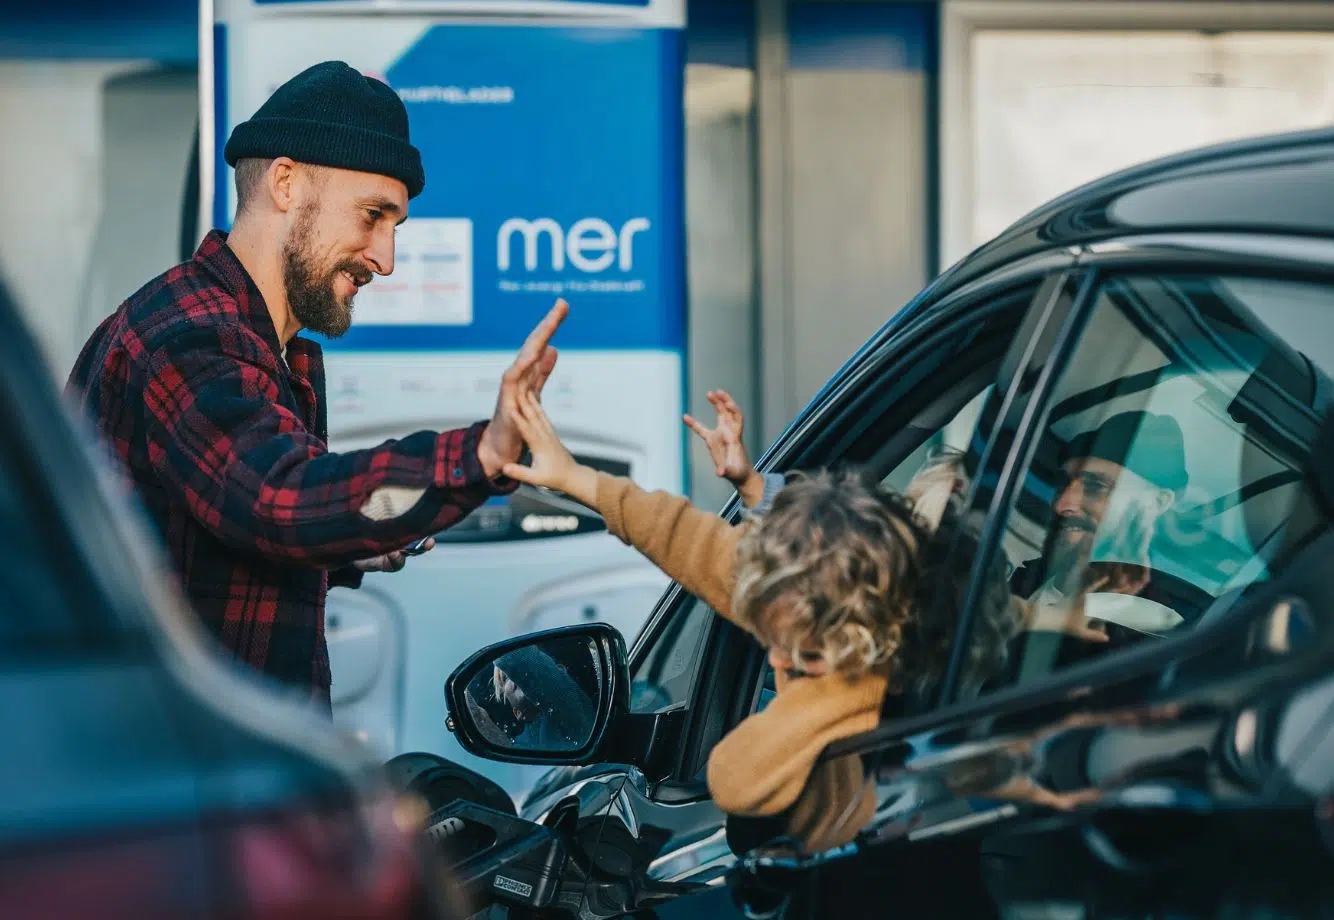 Man with Child at Mer UK Public Charging